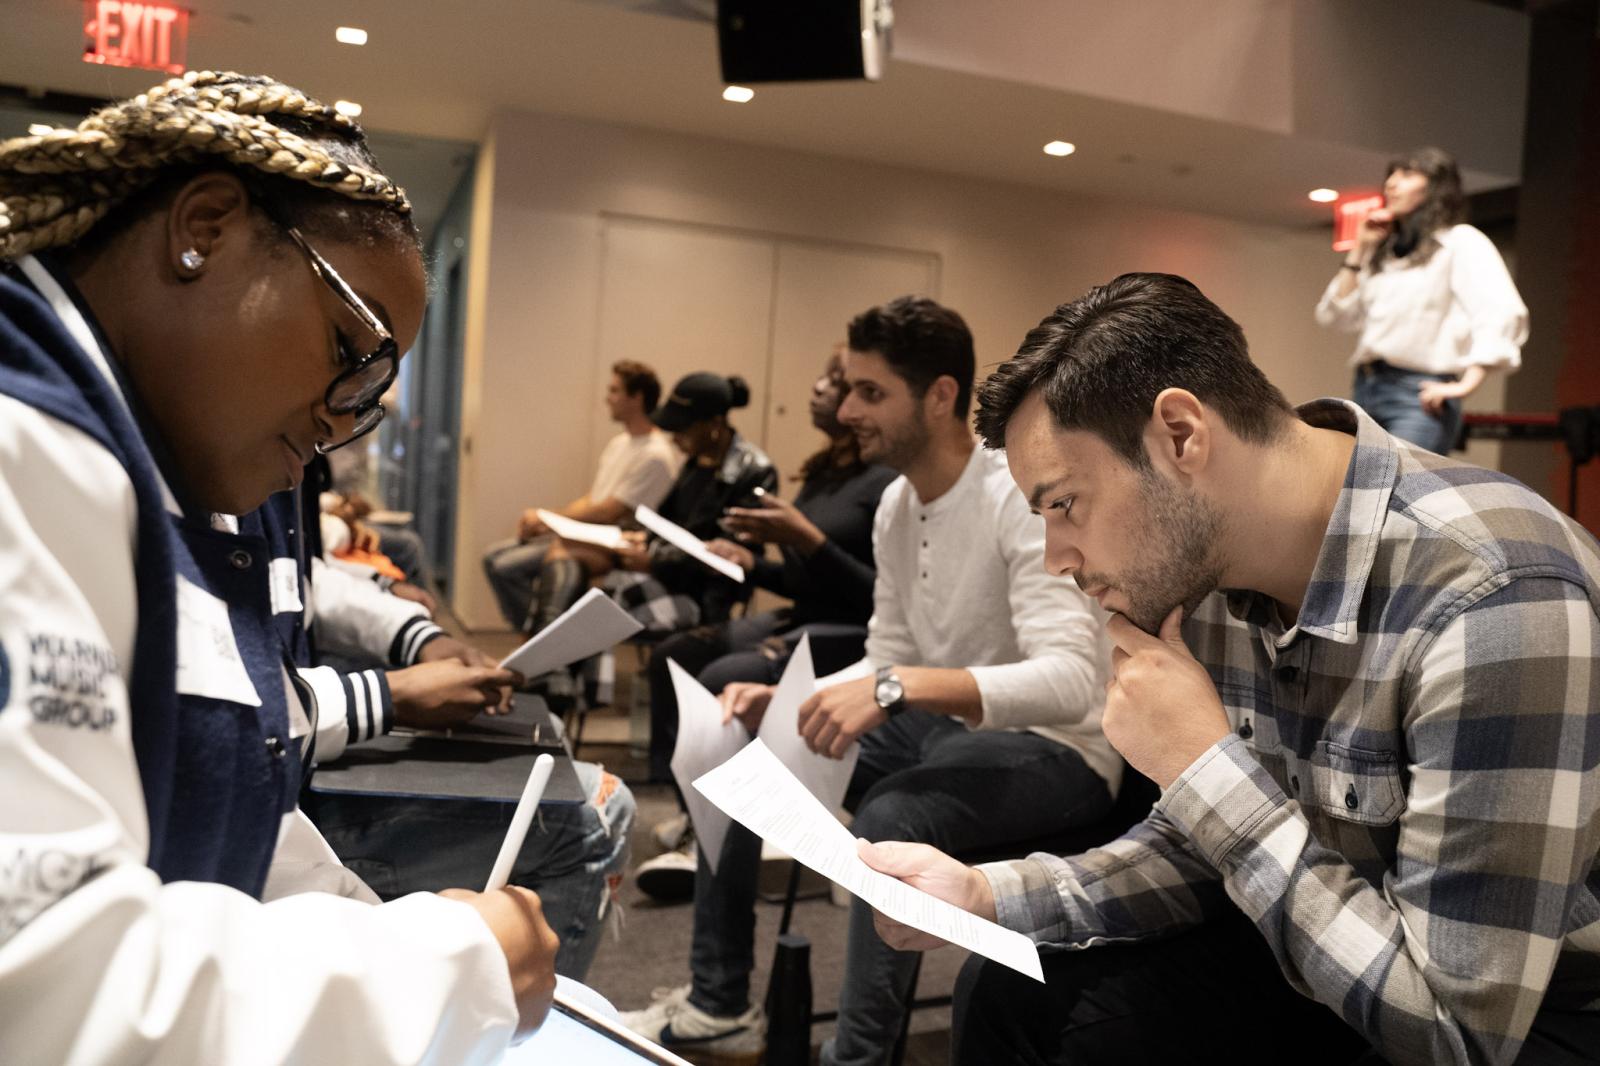 Fellows received critiques on their résumé with Warner Music Group team members who specialize in recruiting young talent. (Source: Warner Music Group)